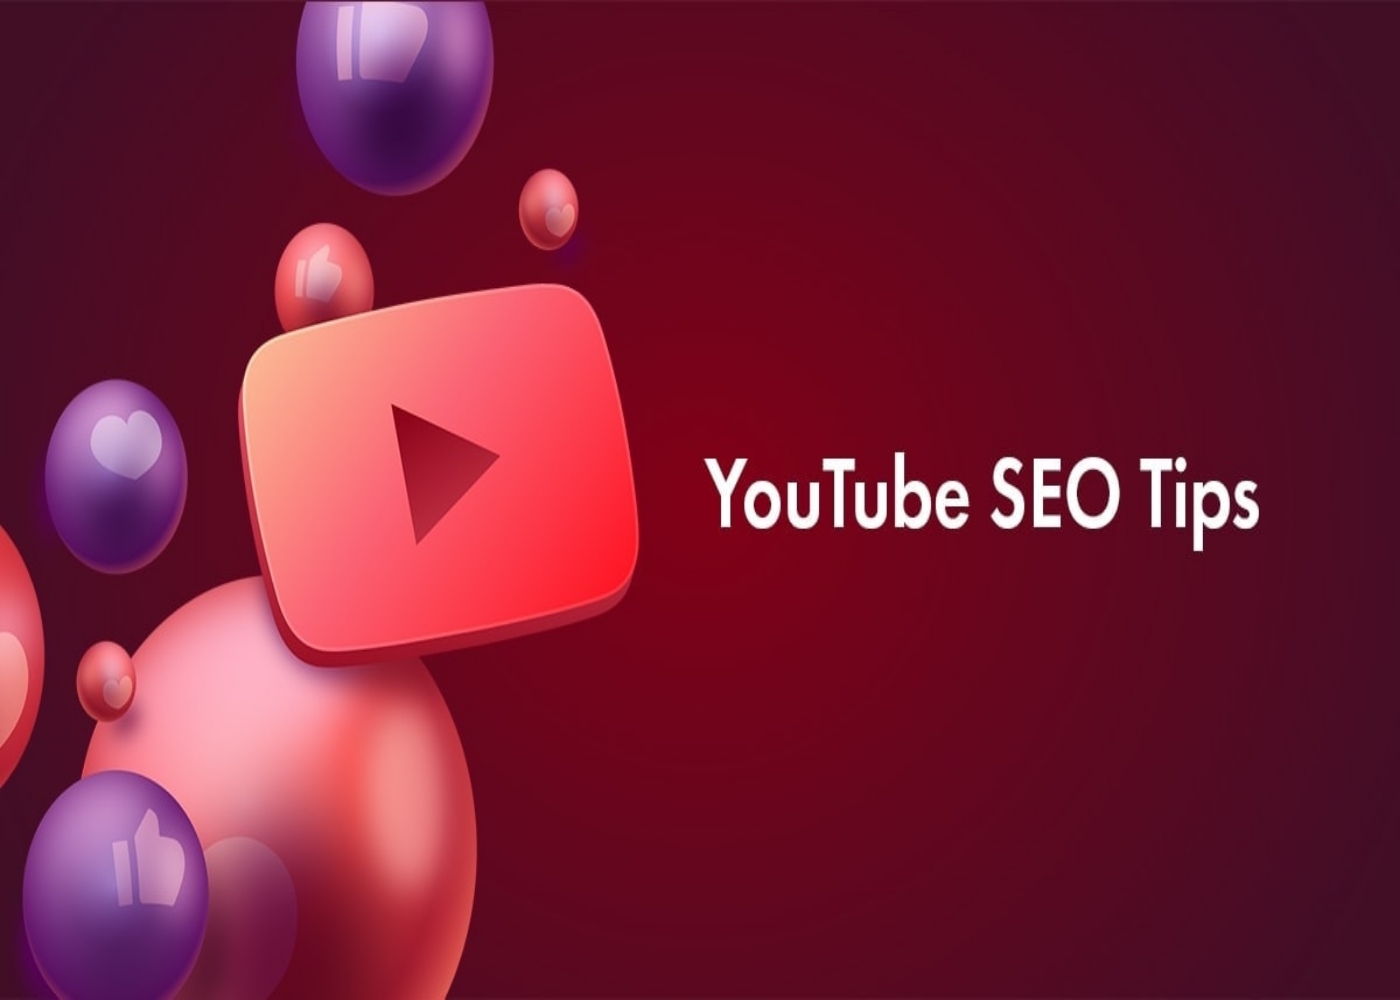 Important SEO Tips to Scale up your YouTube Video Ranking - Part 2